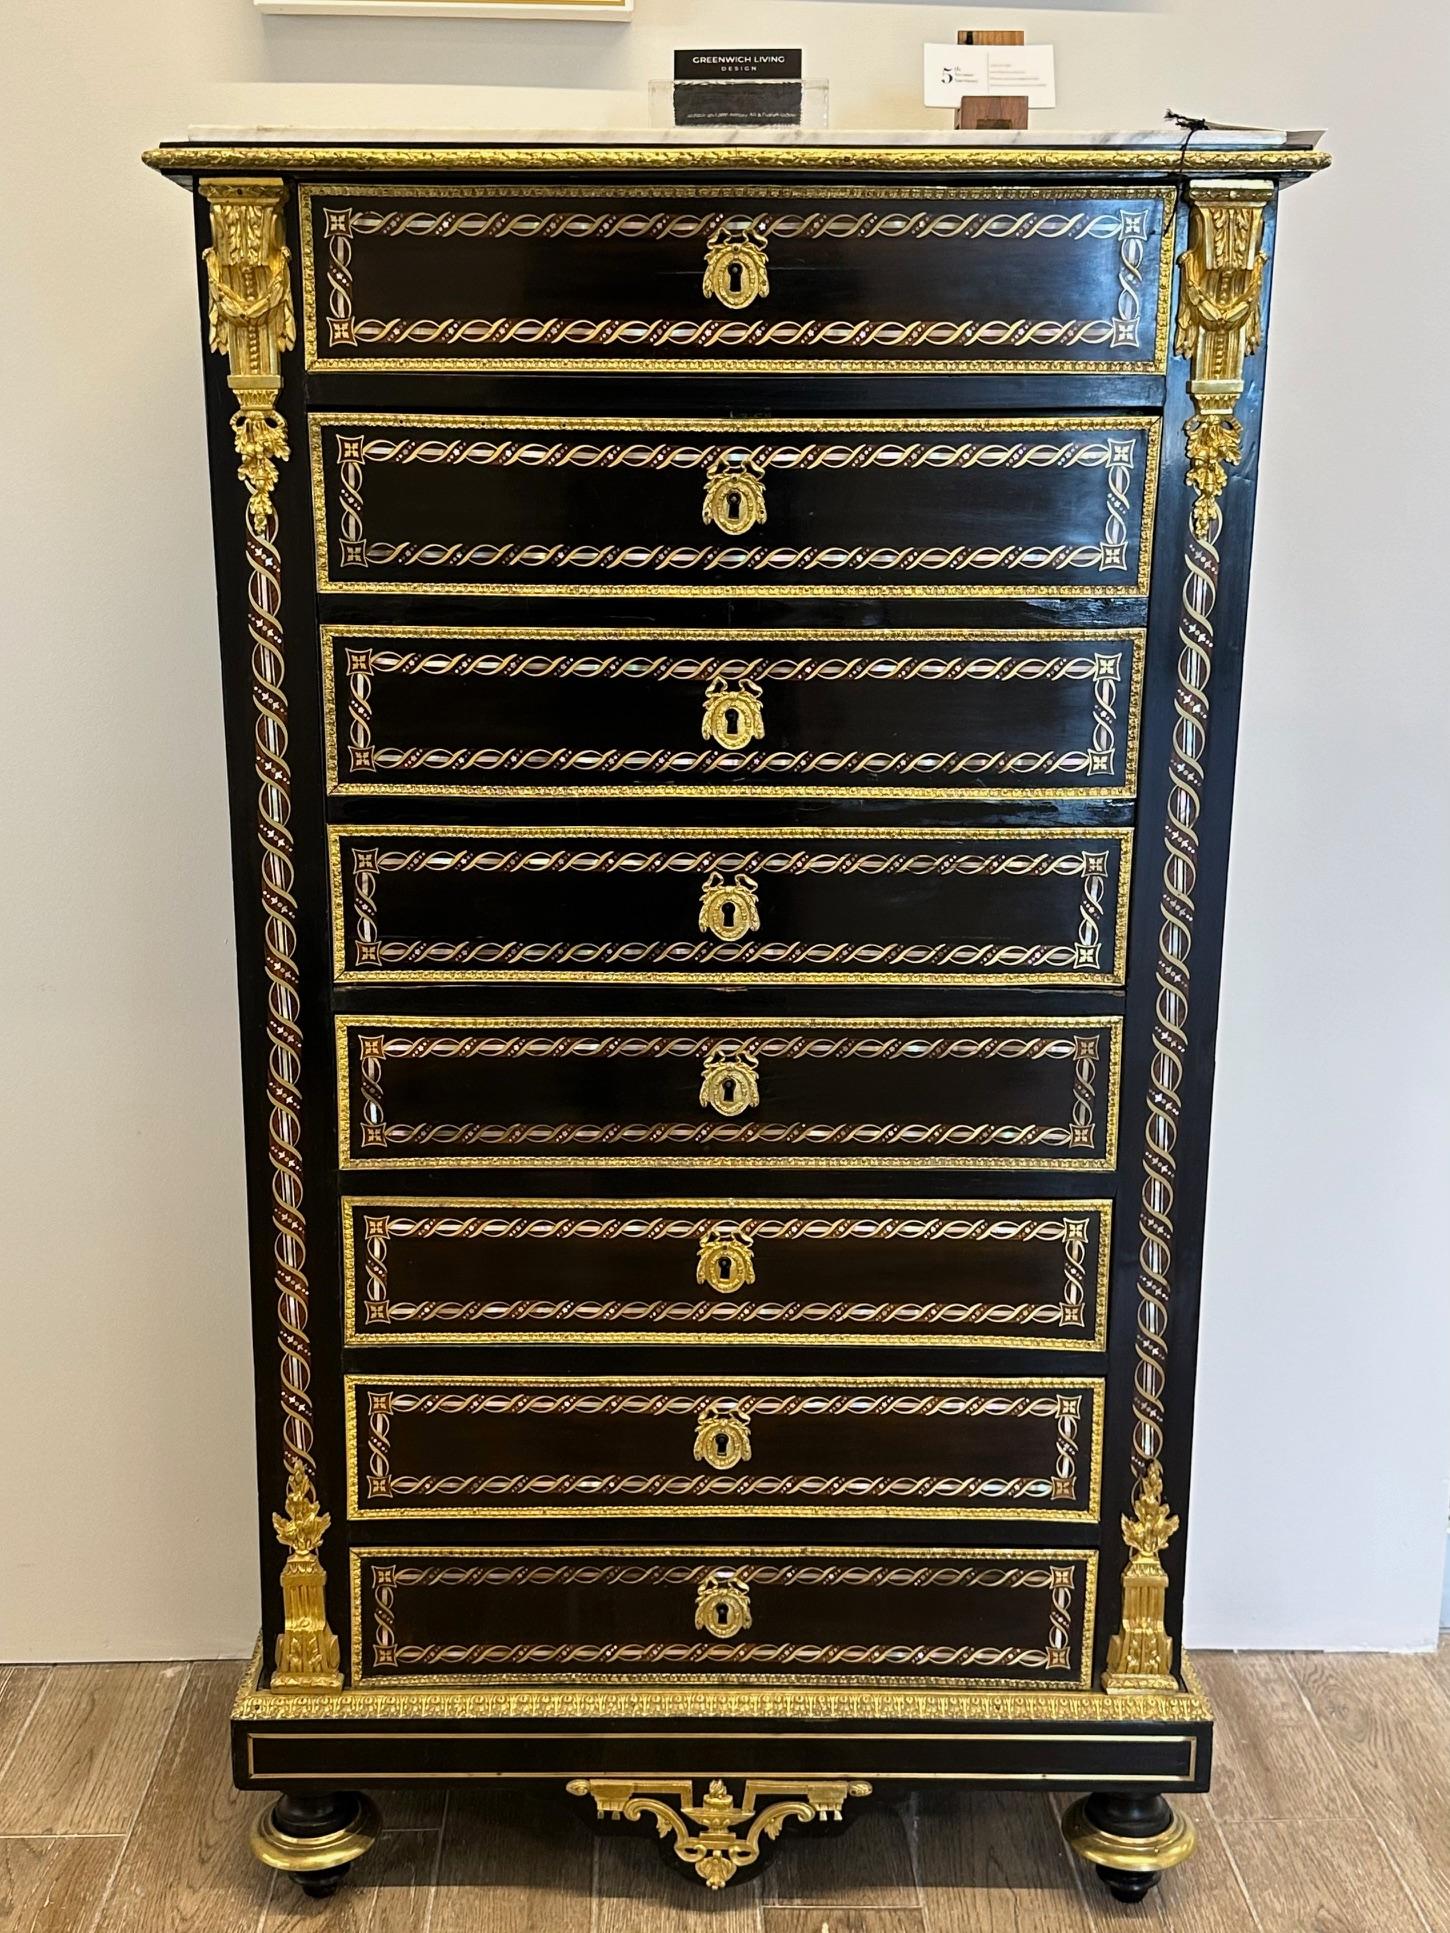 This spectacular Edwardian Bouille inlaid And bronze-mounted Abattant chest desk has been meticulously refinished and hand rubbed French polished to its original form. Having wonderfully chiselled bronze mounts with an overwhelming inlay of